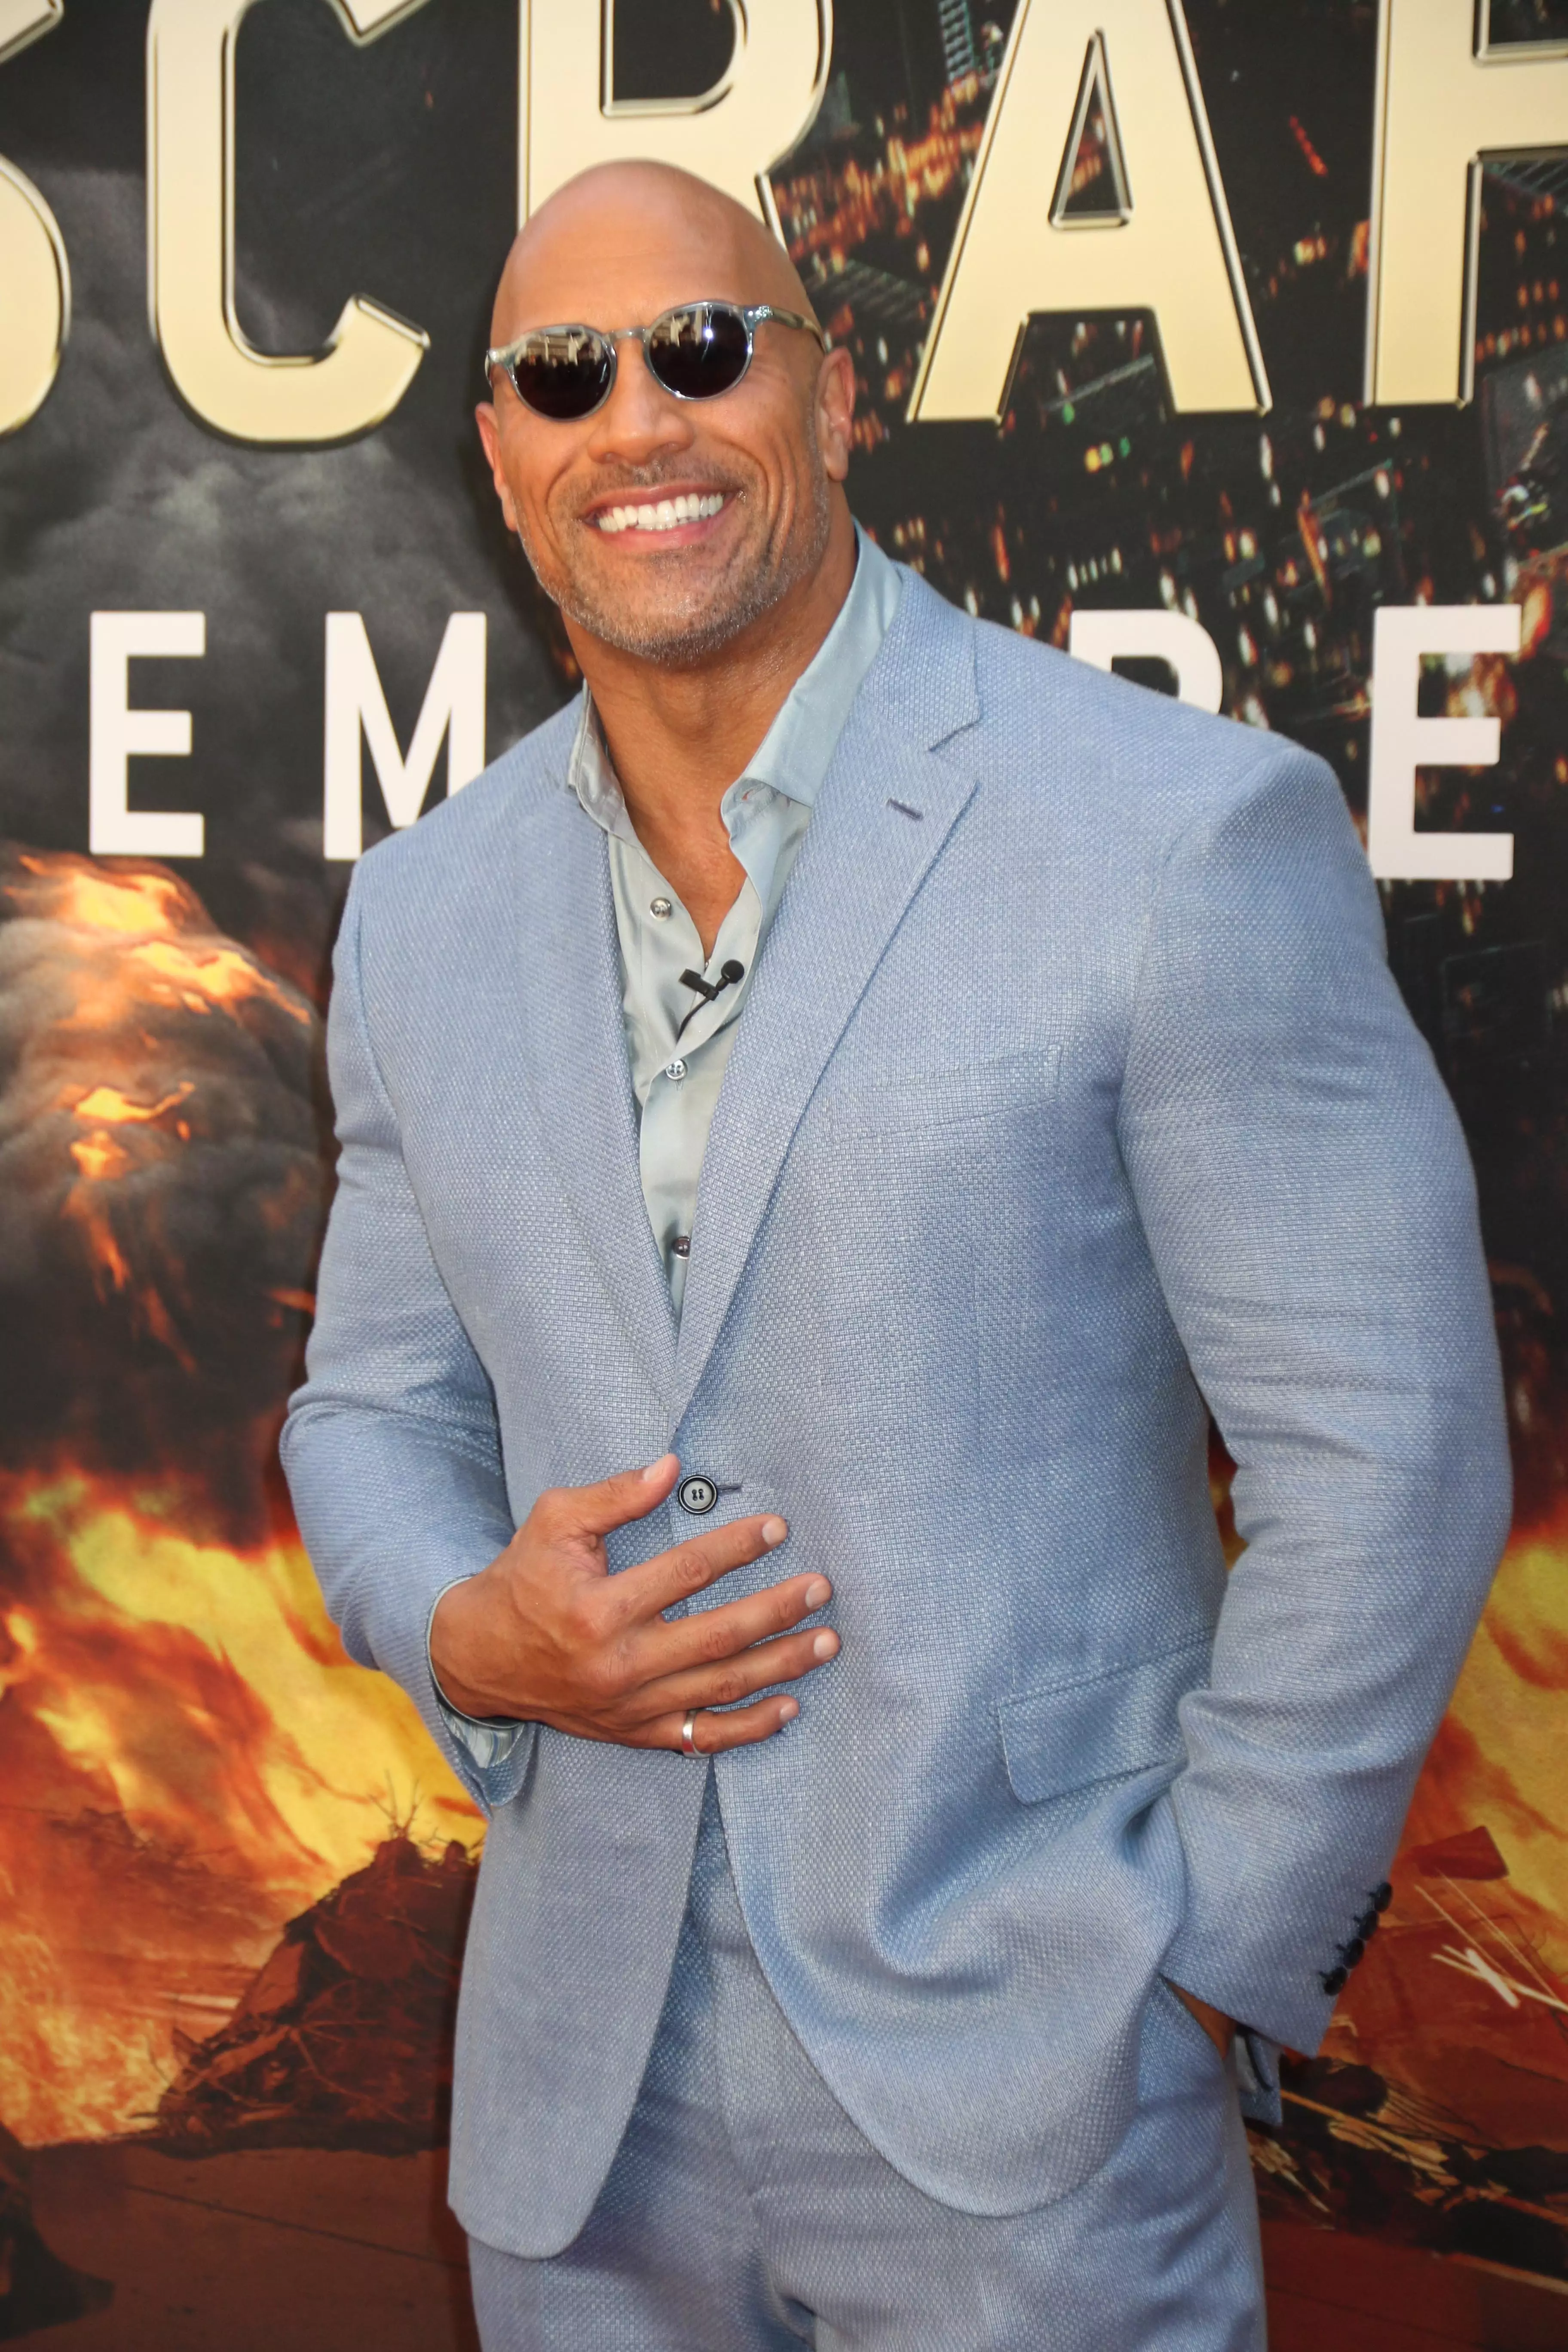 The Rock says he won't be in the next instalment of Fast and Furious but could be back in the future.